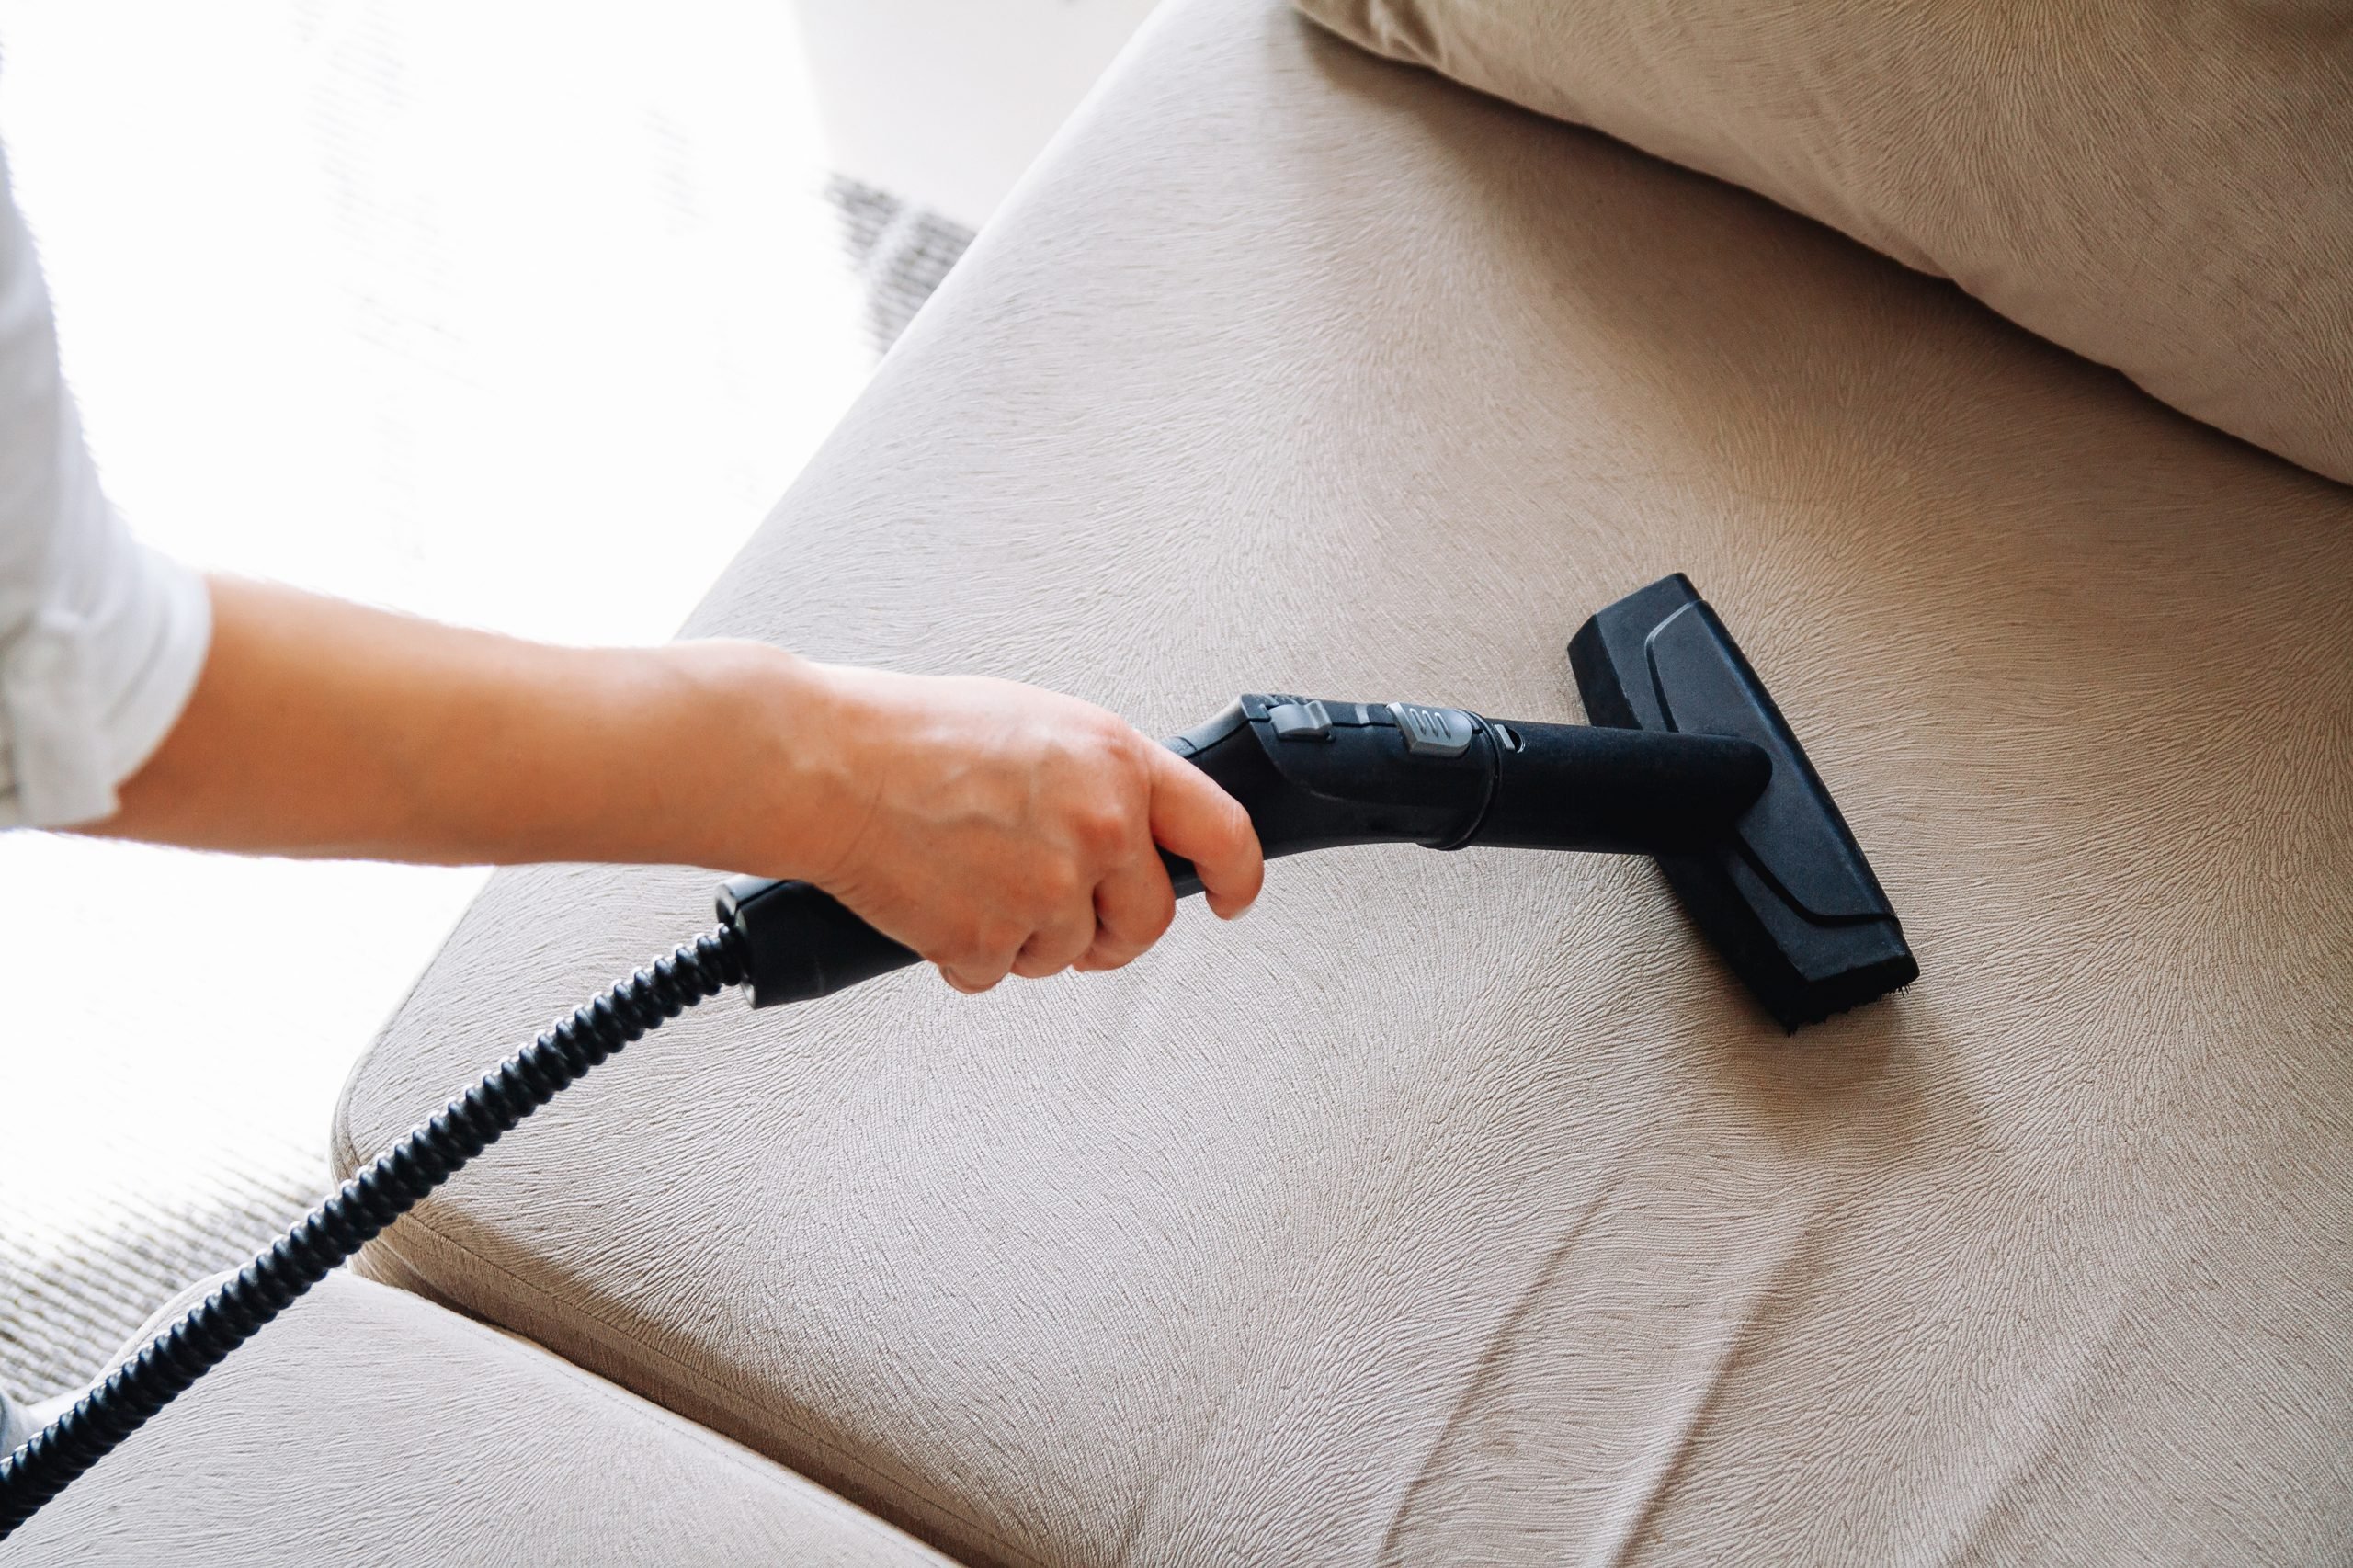 Viral for a reason: 15 TikTok cleaning products you can trust